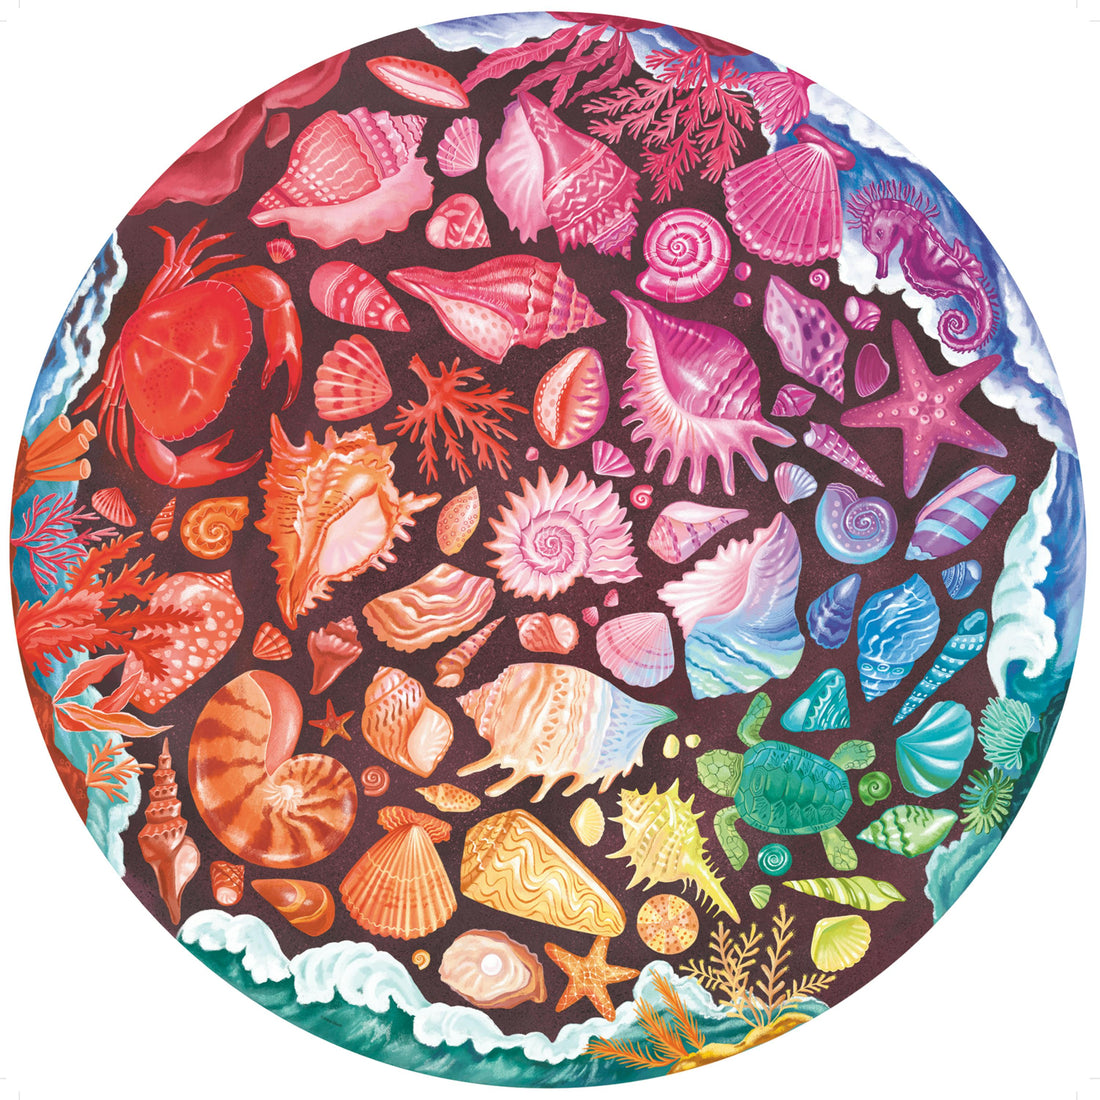 500 Piece Puzzle - Circle of Colors: Shells